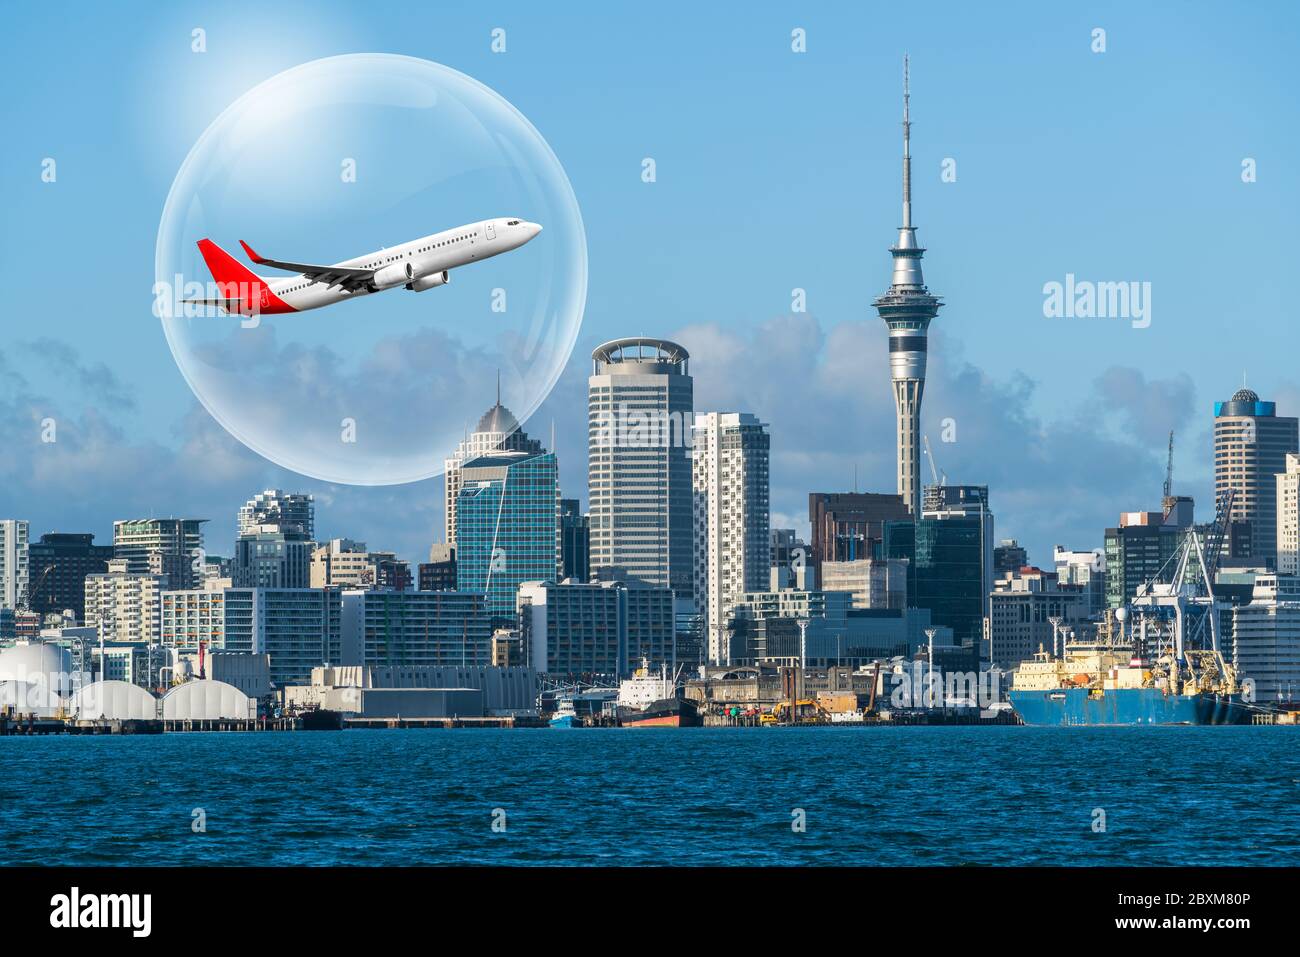 Travel bubble concept - Airplane traveling in bubble representing international travel bubble project to revive tourism and hotel industry among count Stock Photo